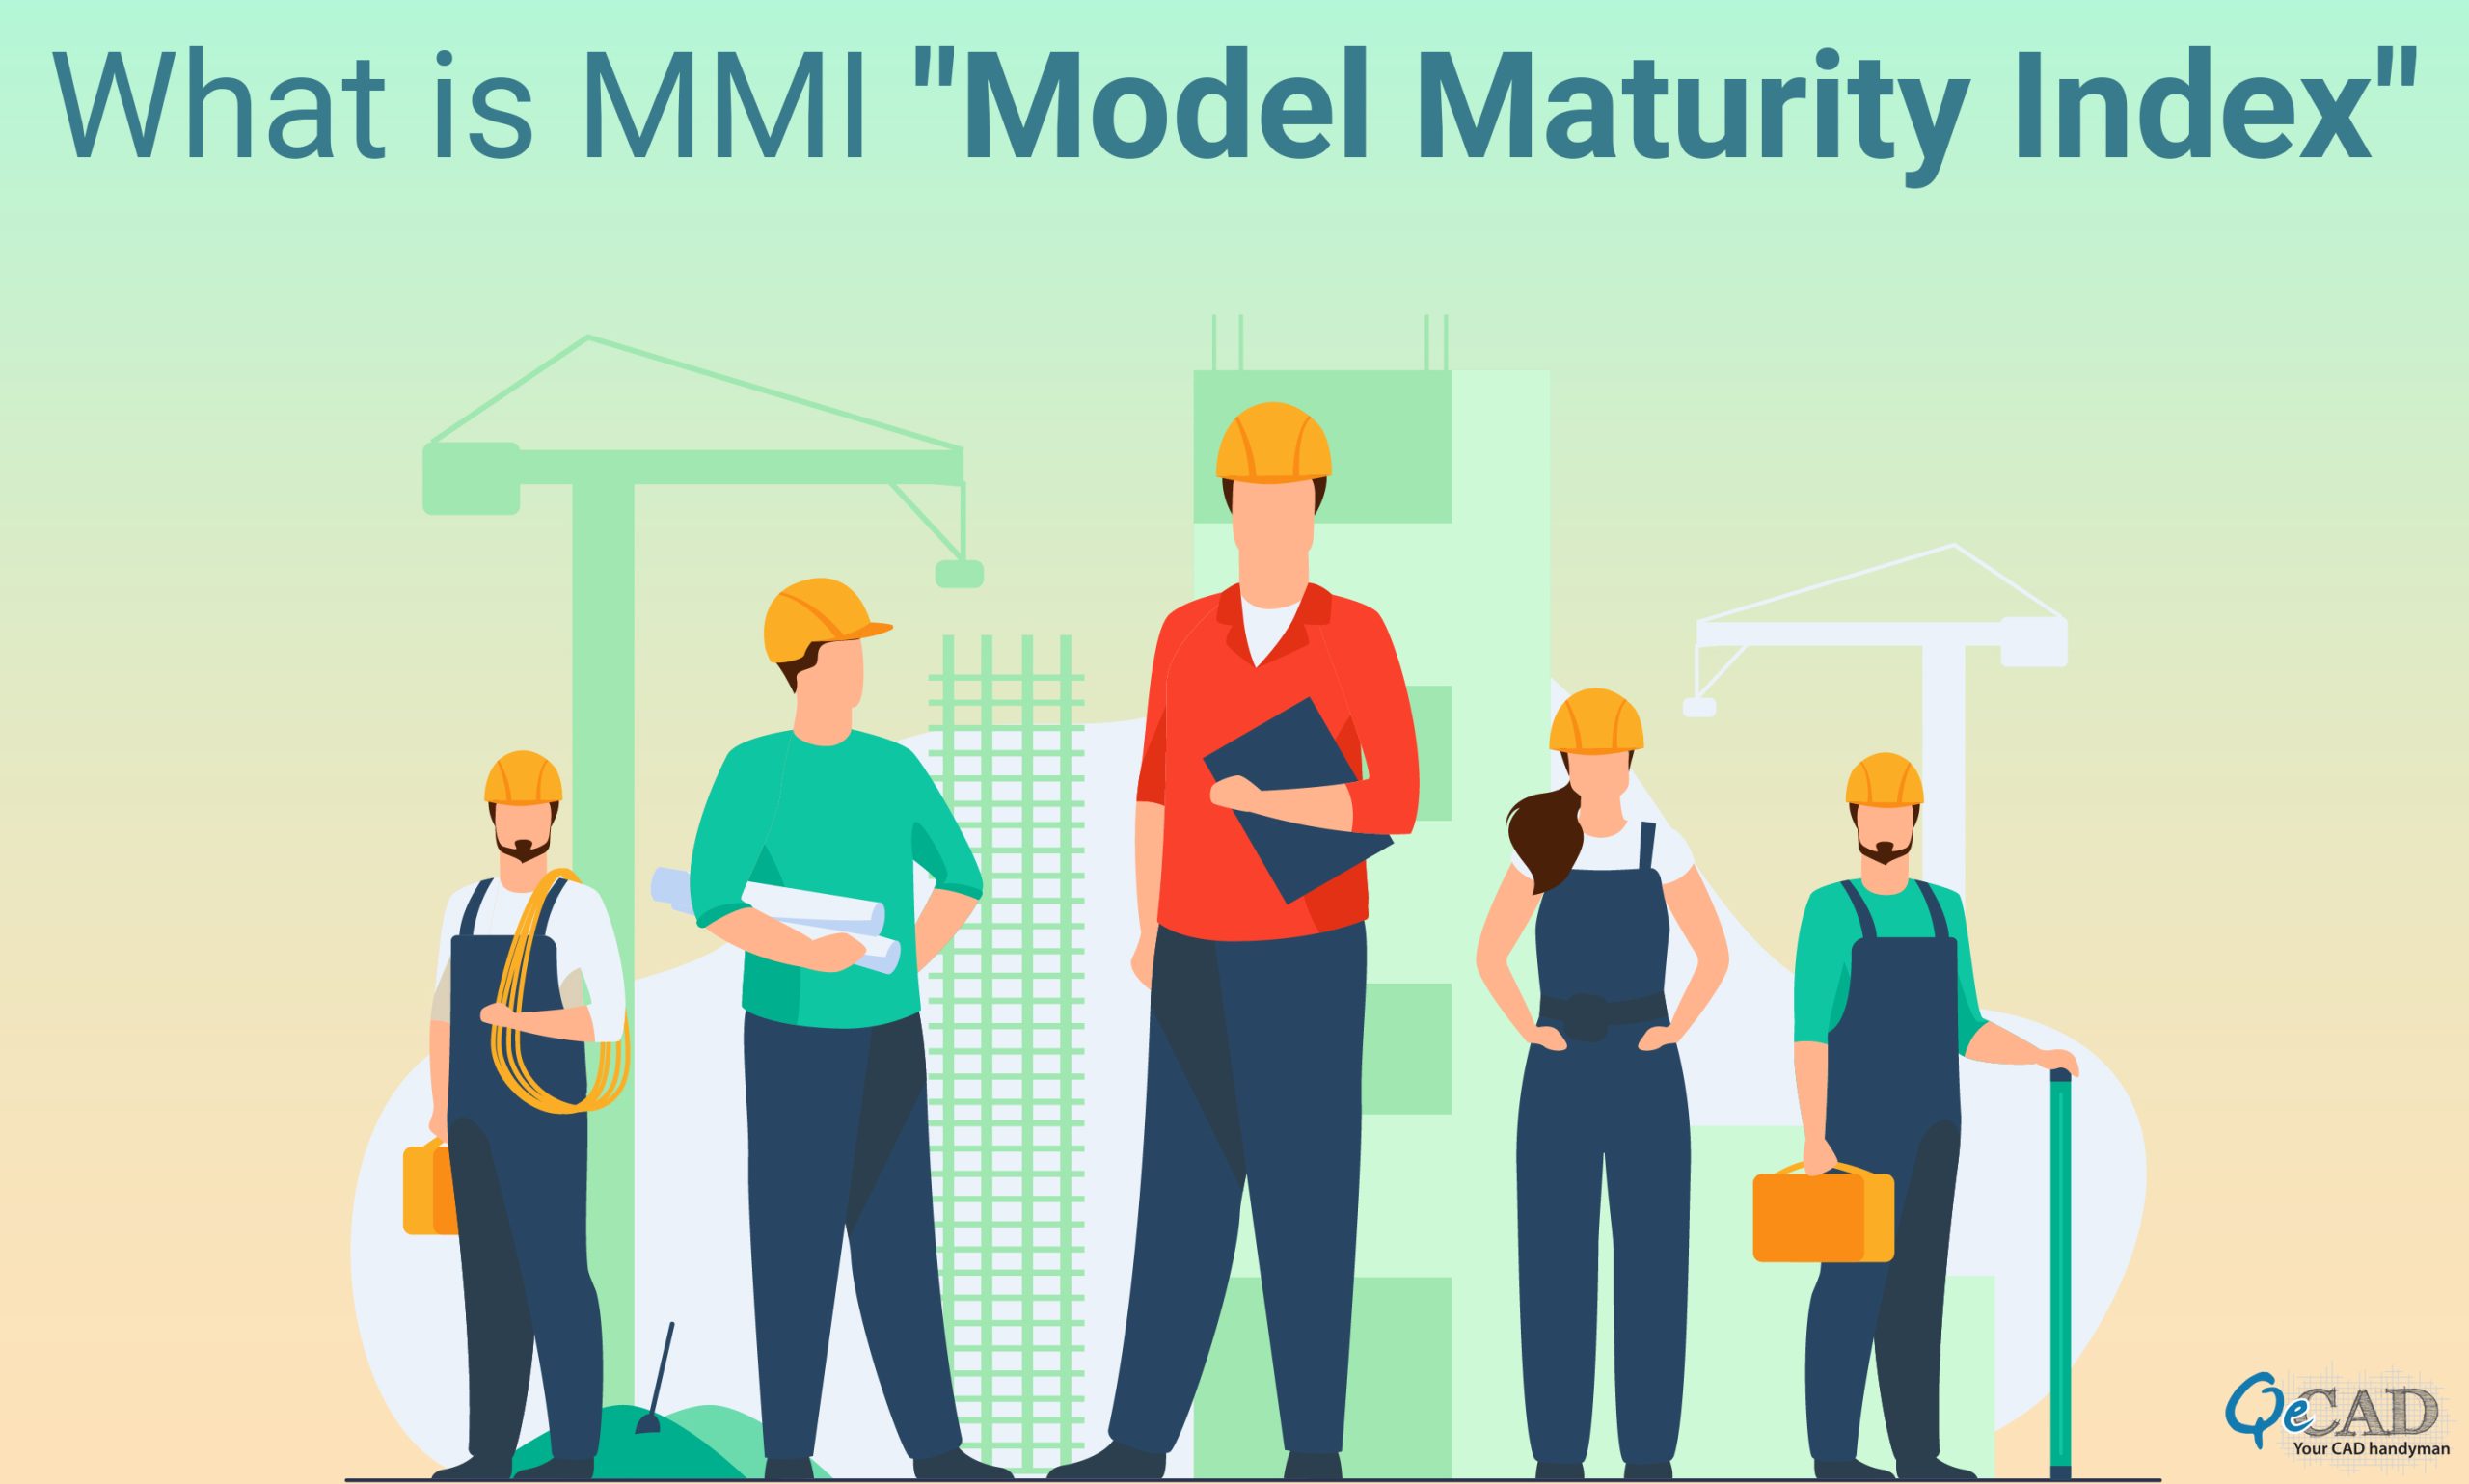 What is MMI "Model Maturity Index